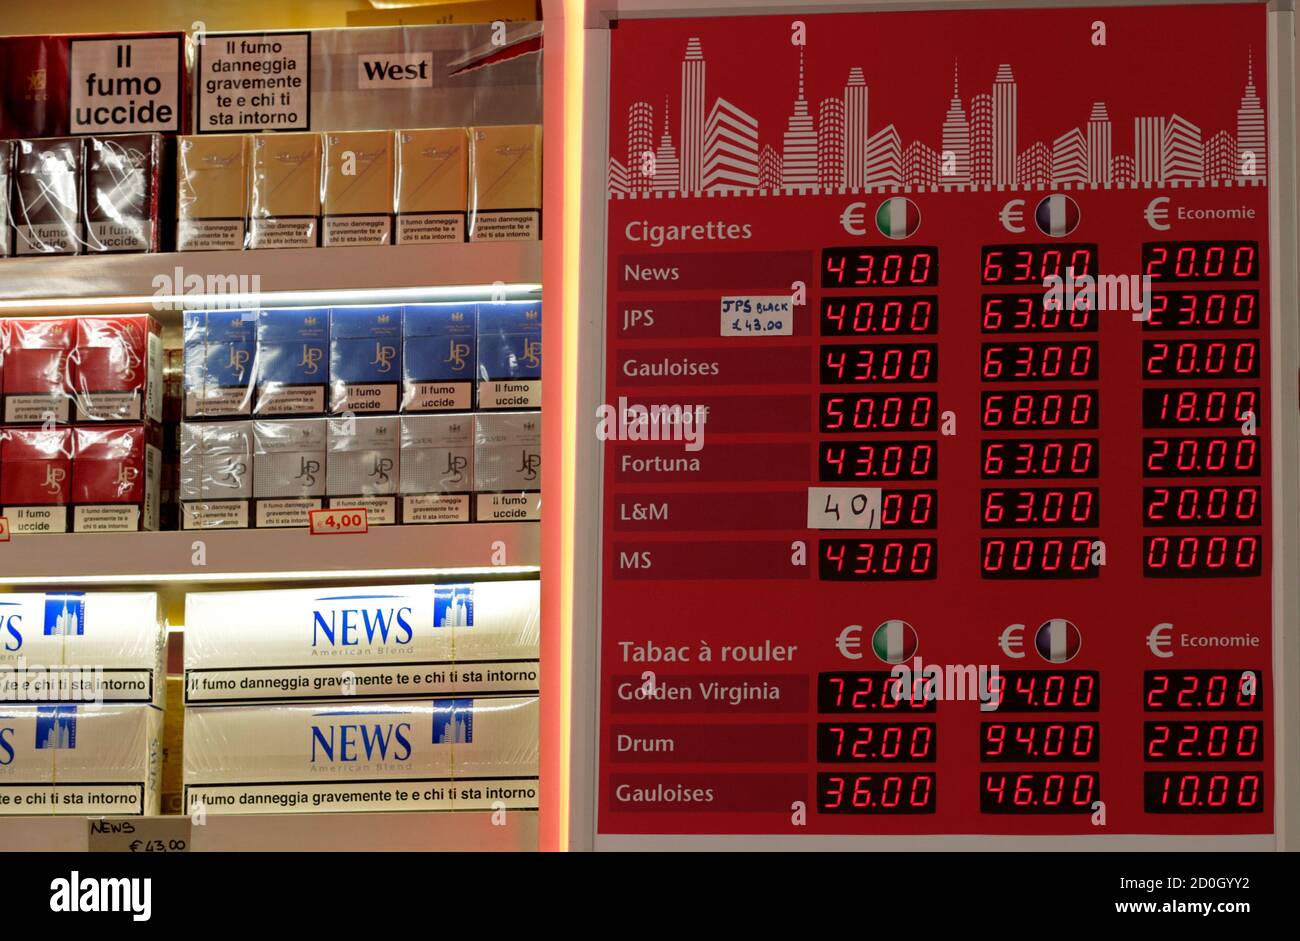 Cigarette packets are seen lined-up next to an information board which displays their price when purchased in Italy (L) and France (C) with the difference in savings (R), in a supermarket in Latte, near the Franco-Italian border, January 13, 2014. The prices of cigarettes have increased by Euro 0.20 on January 13, 2014. REUTERS/Eric Gaillard   (ITALY- Tags: BUSINESS Stock Photo